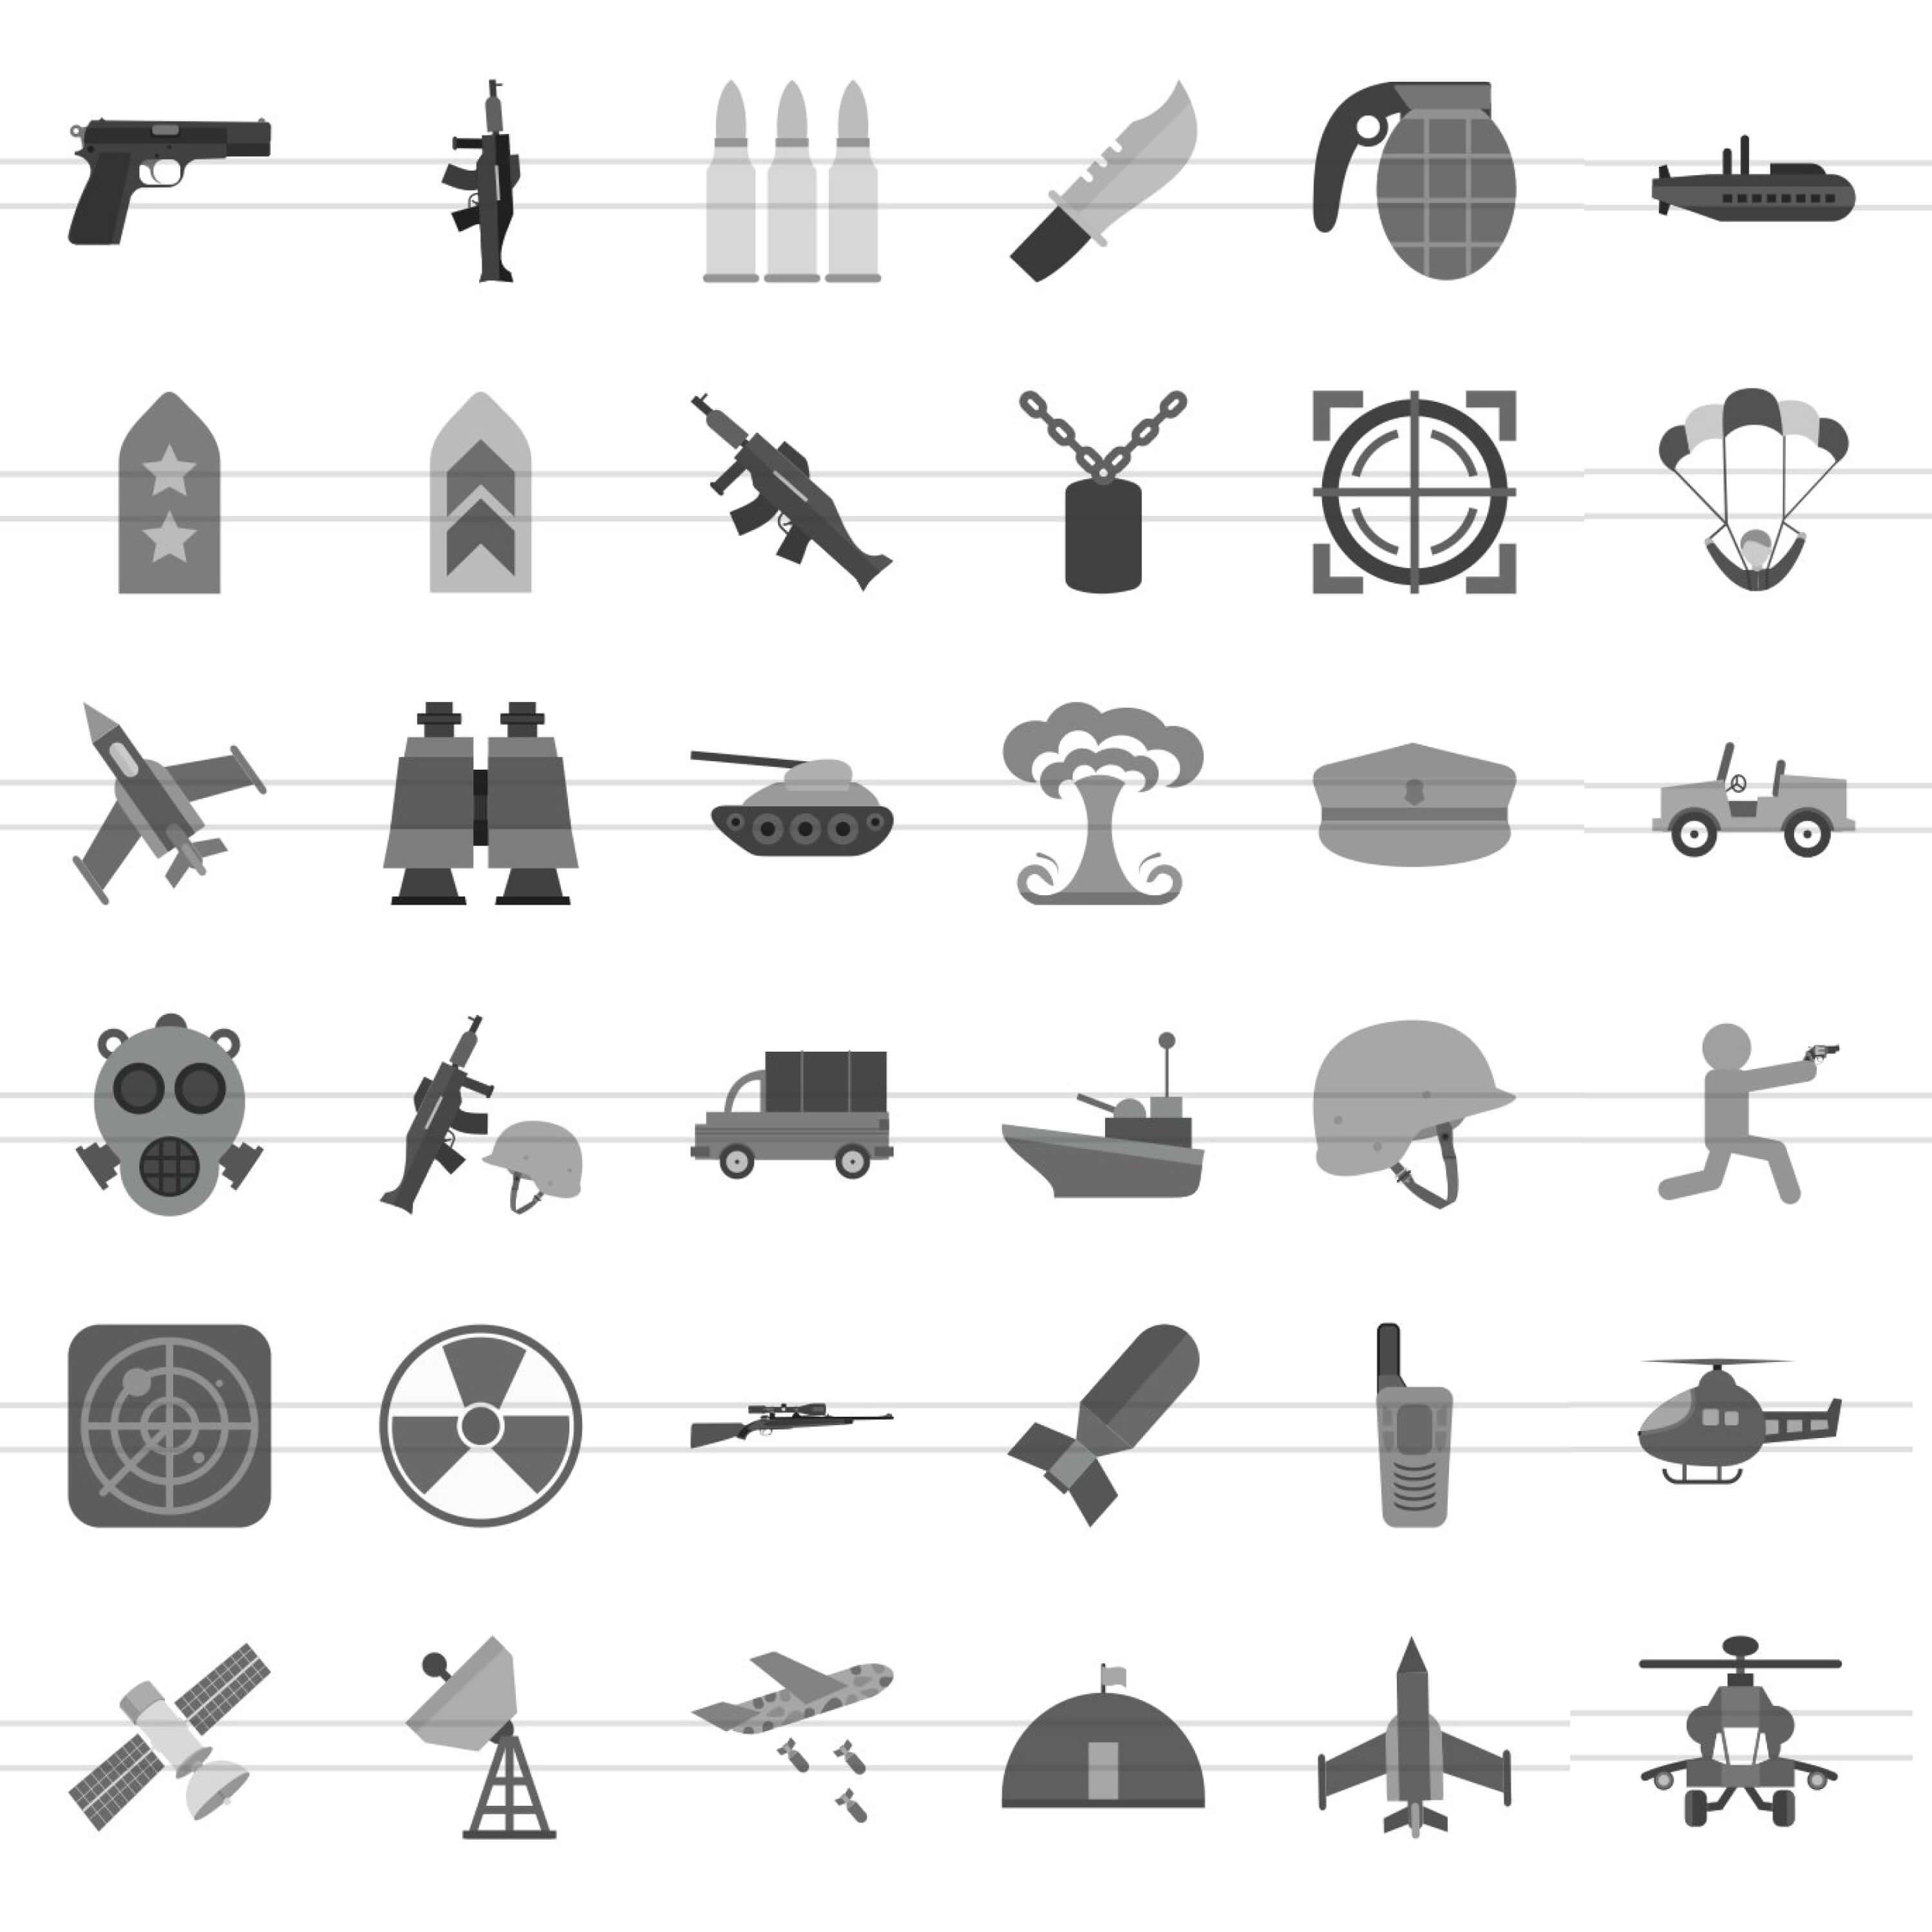 Gray icons of bombs, bulletproof vests and planes.